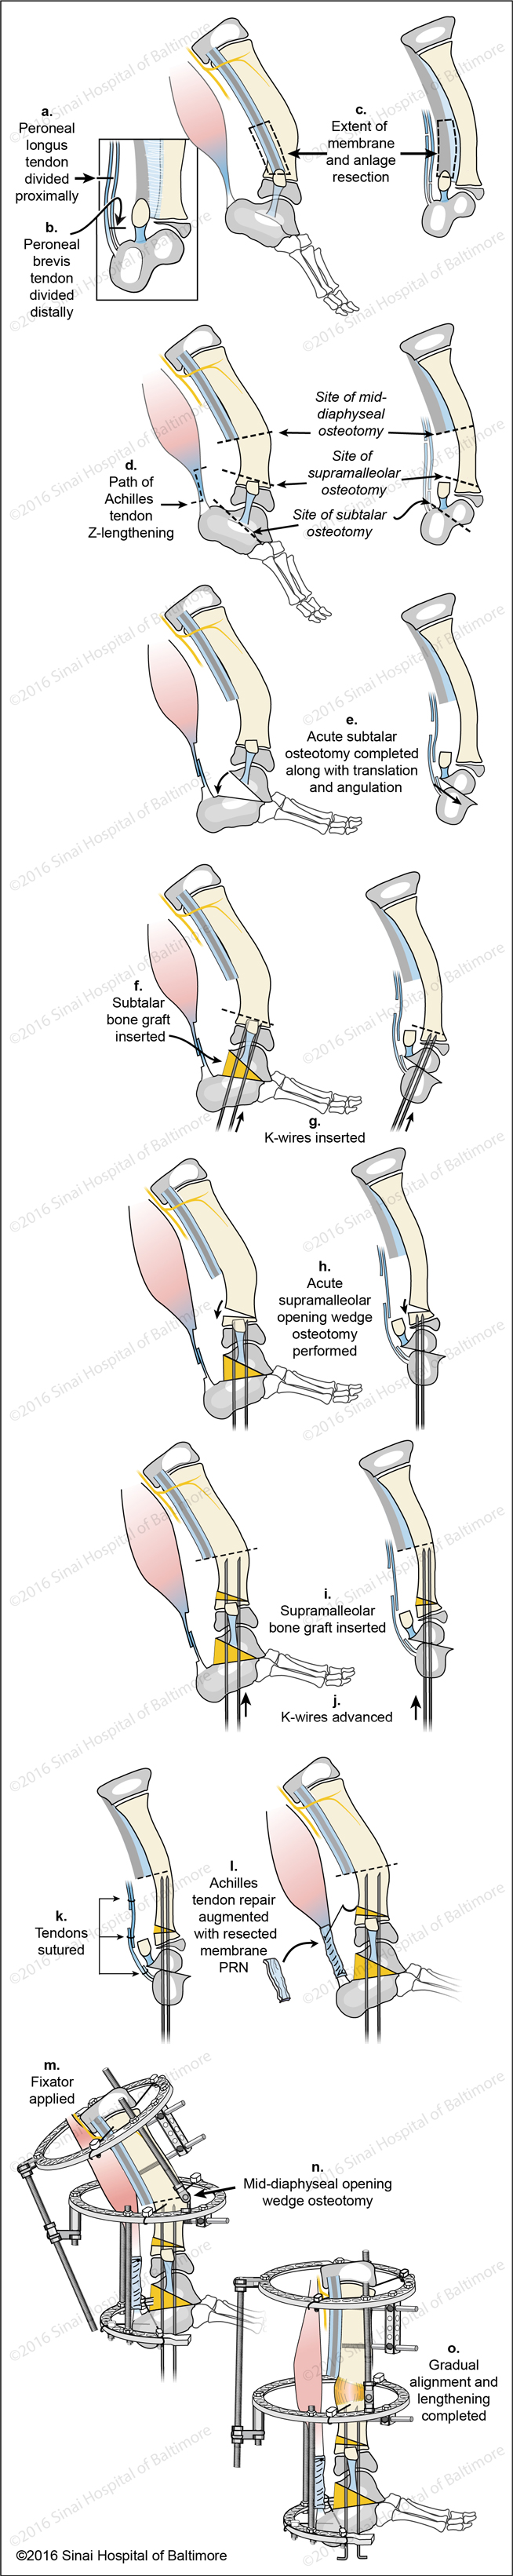 SUPERankle Surgical Technique for Combined Subtalar and Supramalleolar Fibular Hemimelia (Paley Type 3C) Fig. A, Peroneal longus tendon is divided proximally. B, Peroneal brevis tendon is divided distally. C, The extent of the membrane and anlage resection is identified. D, The path of the Achilles tendon Z-lengthening is identified along with the sites of the mid-diaphyseal, supramalleolar, and subtalar osteotomies. E, Acute subtalar osteotomy completed along with translation and angulation. F, Subtalar bone graft is inserted. G, K-wires are inserted. H, Acute supramalleolar wedge osteotomy is performed. I, Supramalleolar bone graft is inserted. J, K-wires are advanced. K, Tendons are sutured. L, The Achilles tendon repair is augmented with the resected membrane as needed. M, The fixator is applied. N, The location of the mid-diaphyseal opening wedge osteotomy is identified. O, Gradual alignment and lengthening is completed.